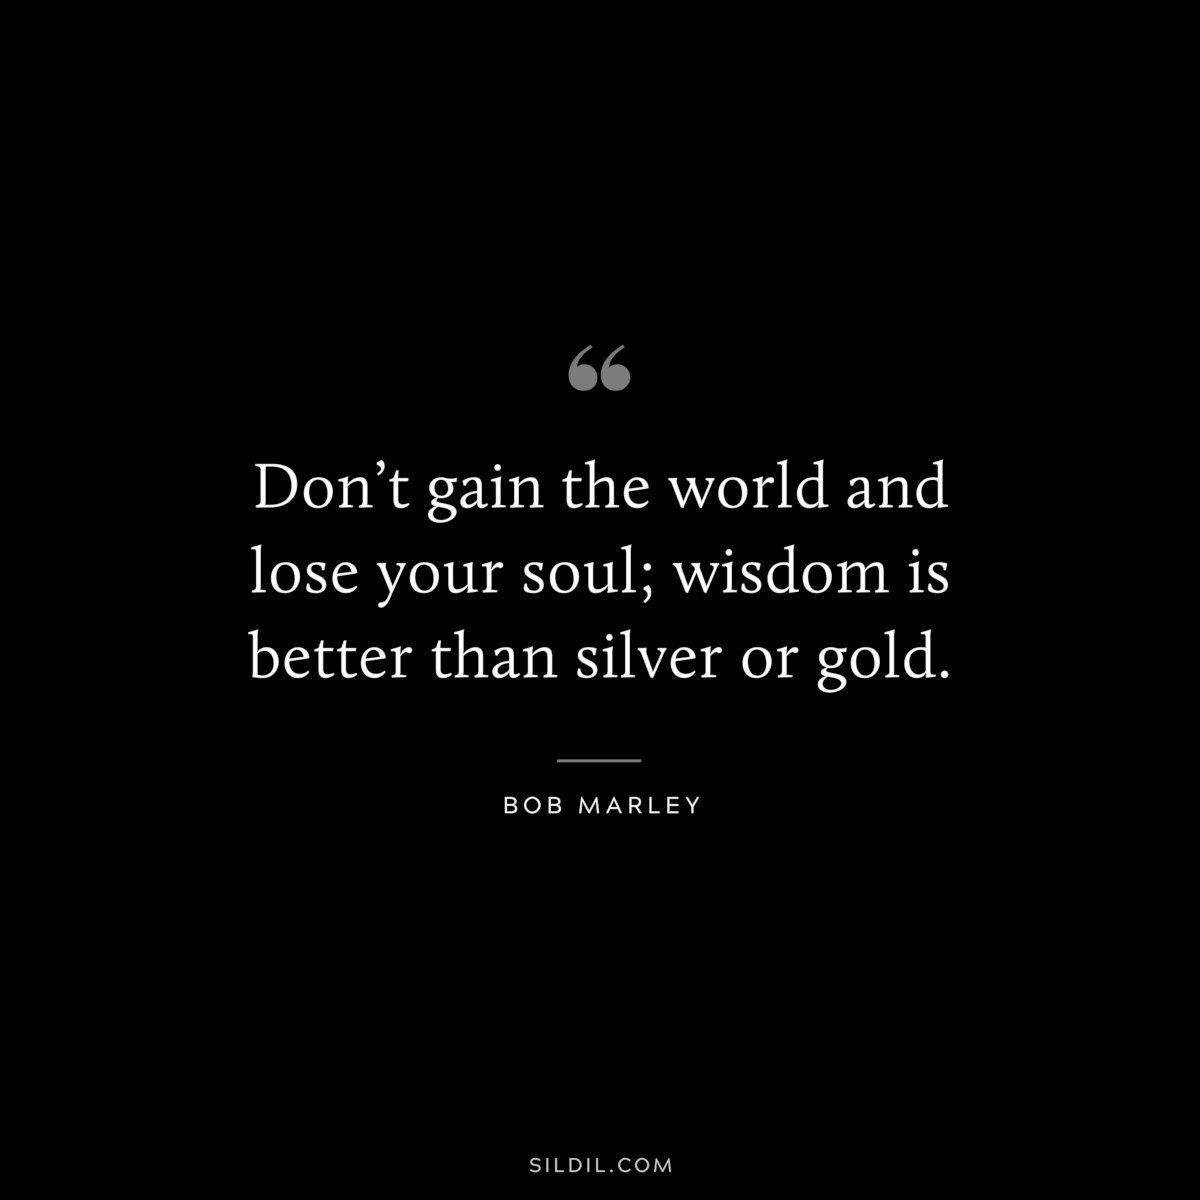 Don’t gain the world and lose your soul; wisdom is better than silver or gold. ― Bob Marley